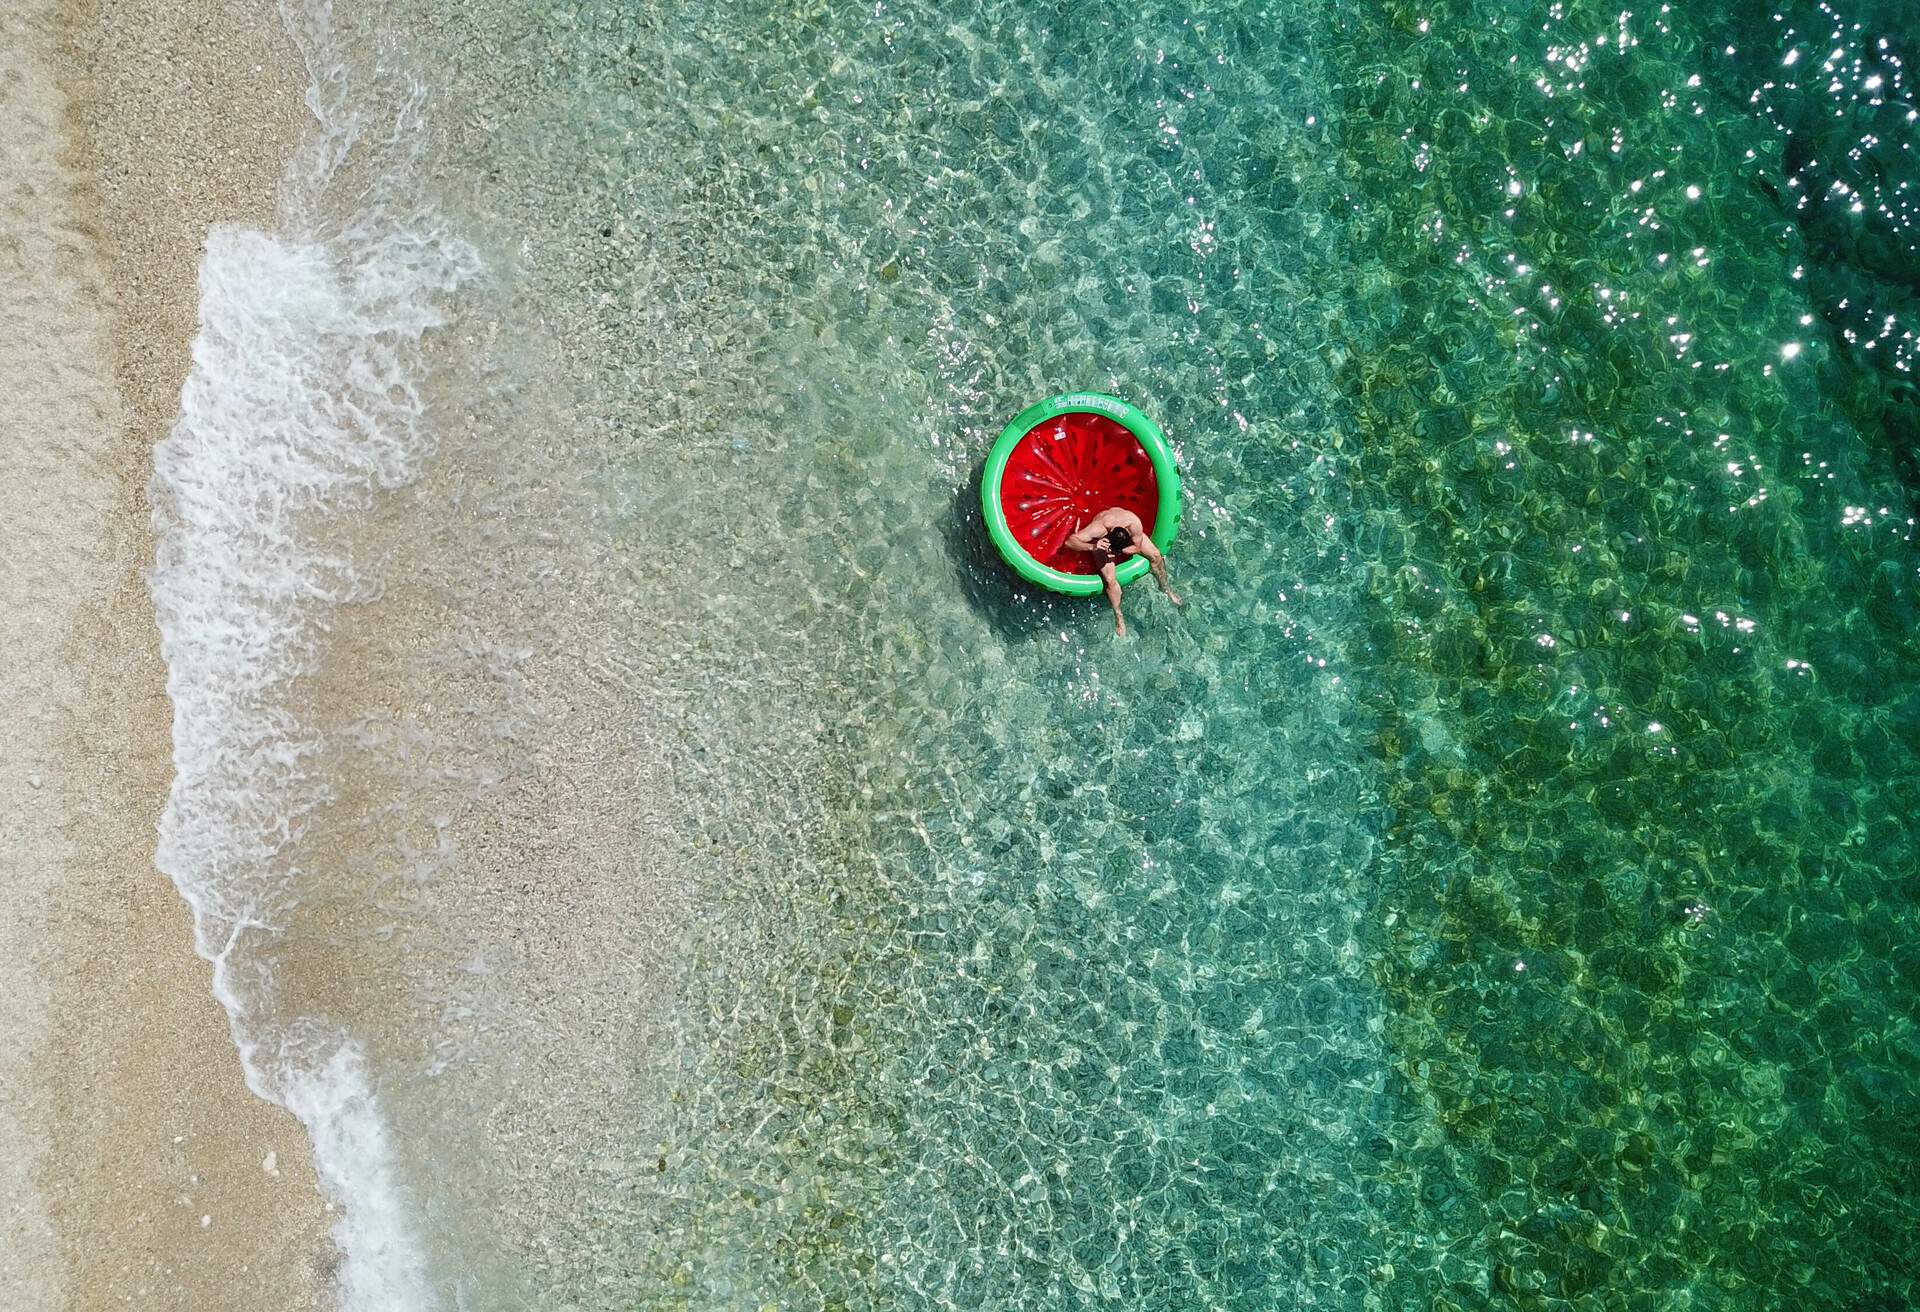 Top view of an individual sitting in an inflatable watermelon on the shore of the emerald sea.